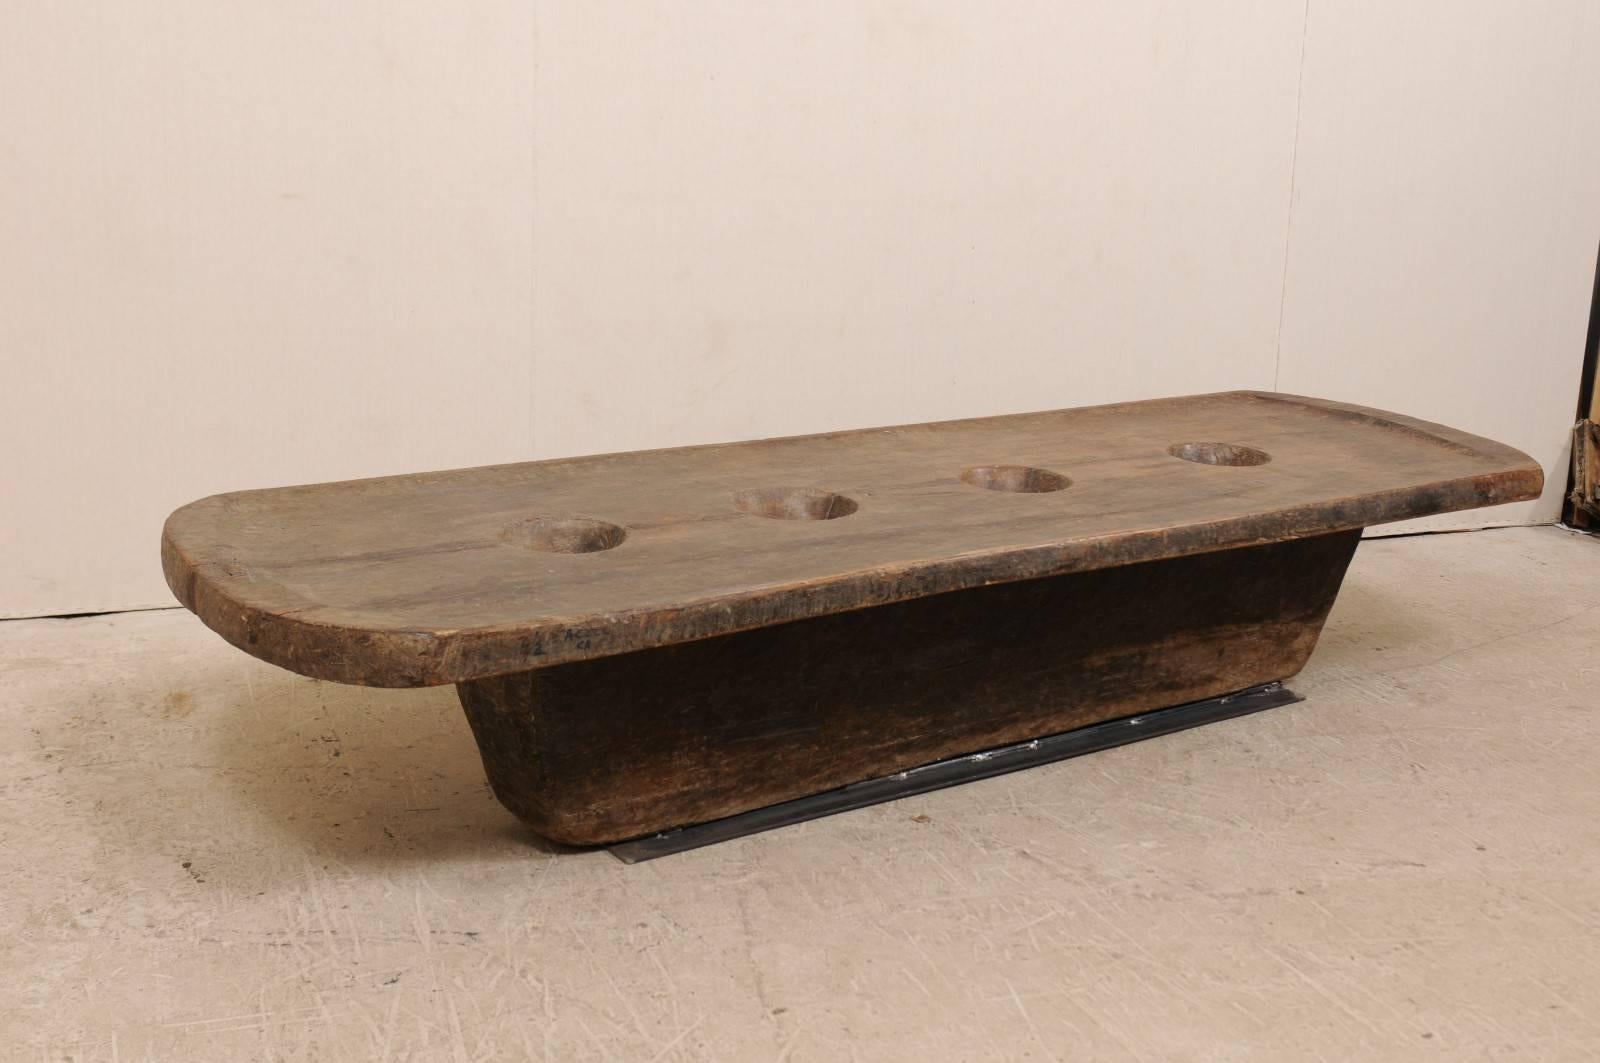 A Naga table from the late 19th-early 20th century. This primitive table from Nagaland, India was originally use by the Naga tribes of North East India as a grinding table, for grains such as millet. The four holes within the center are where the